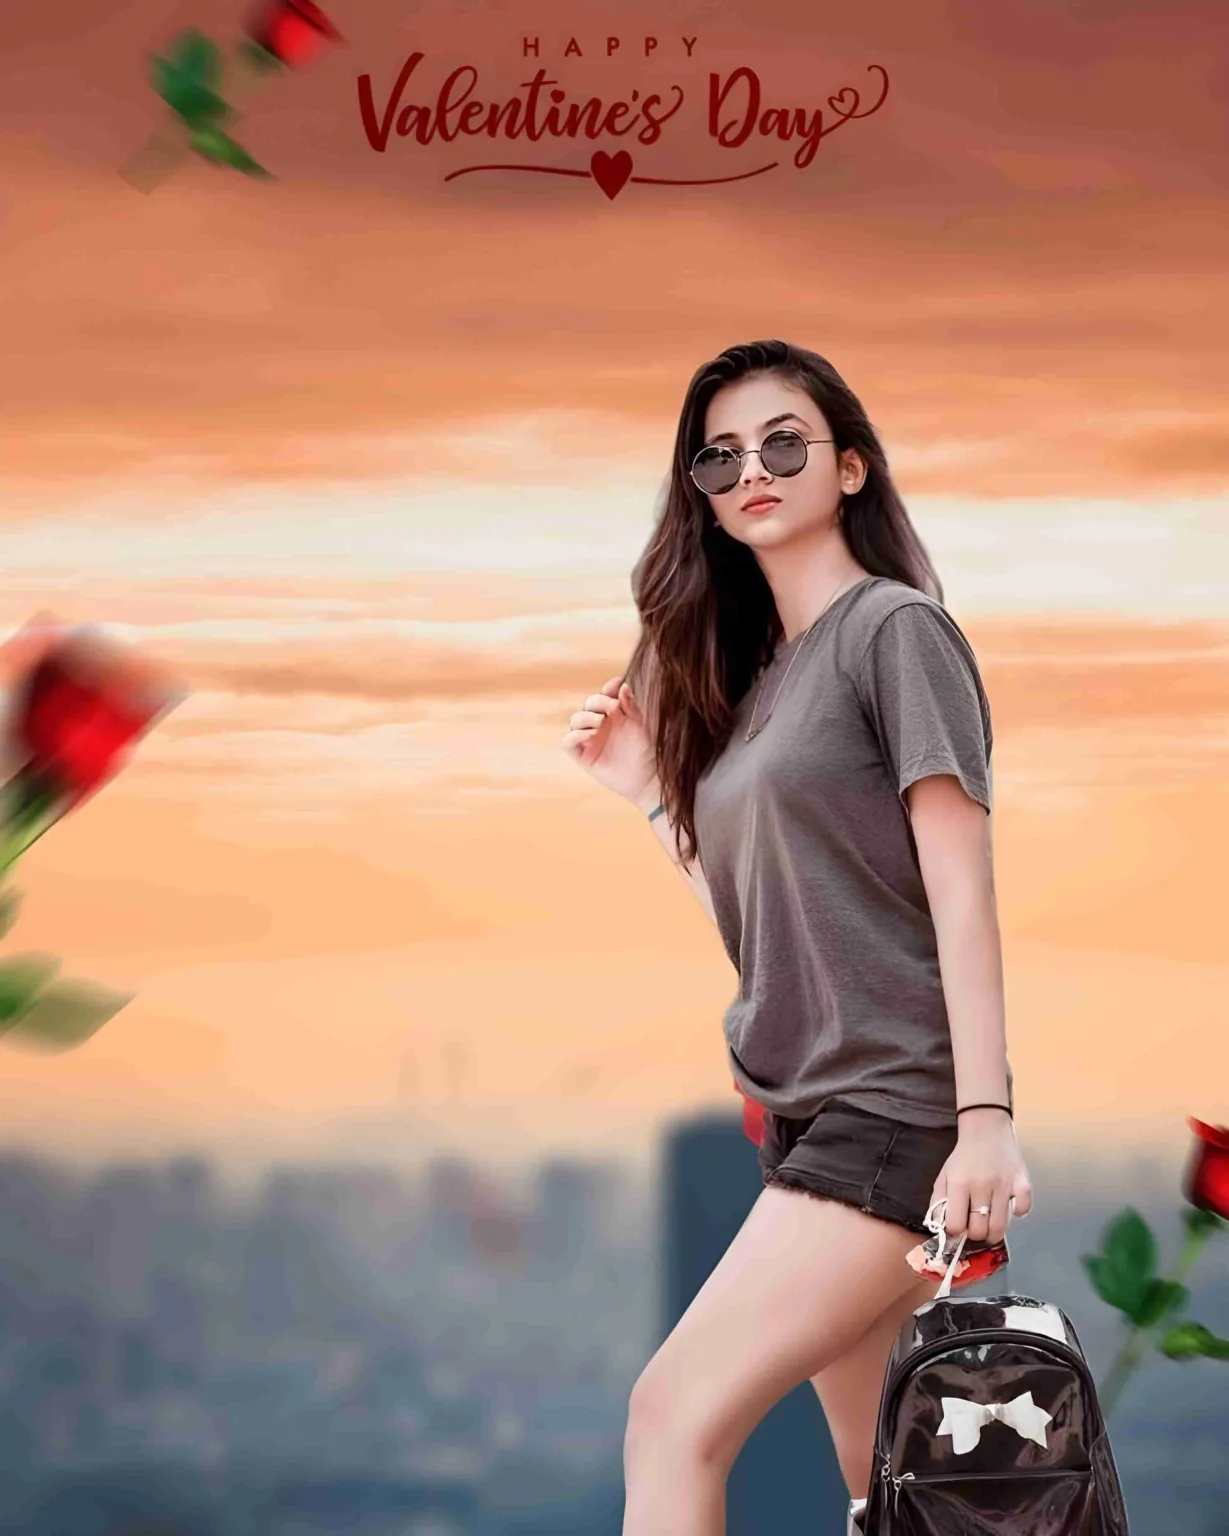 Rose Day Hd Background For Photoshop